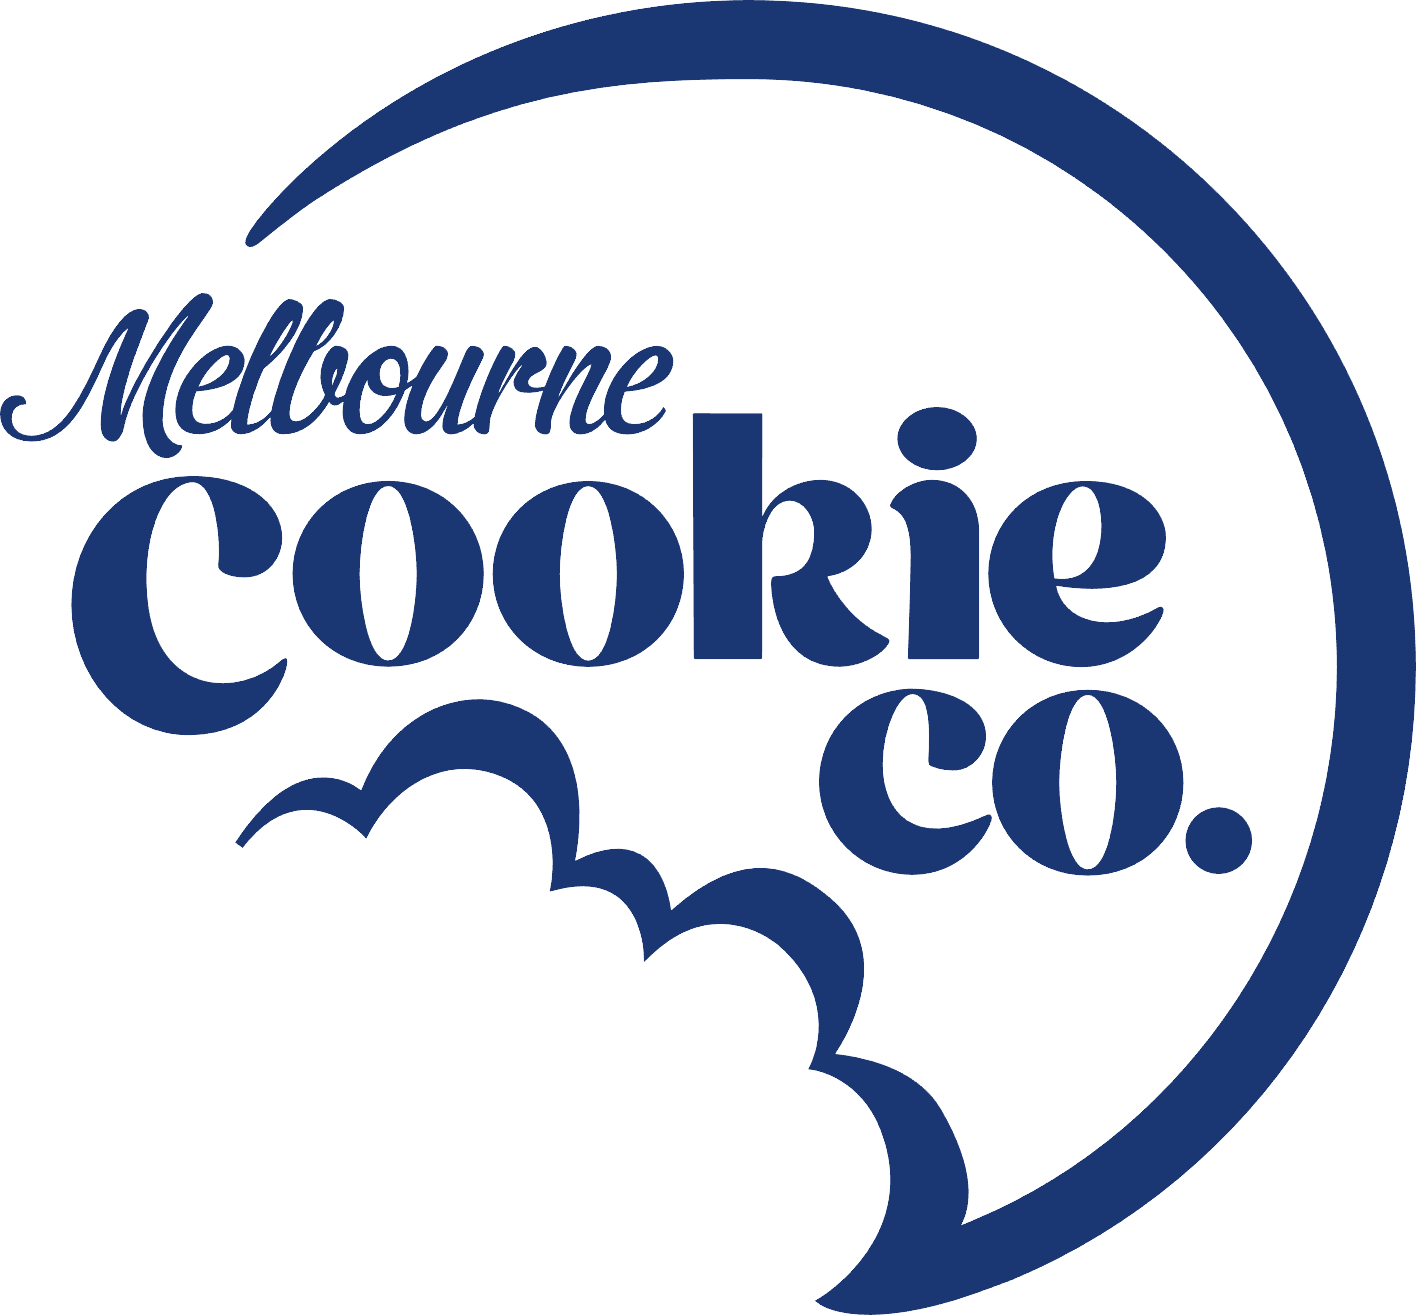 Melbourne Cookie Co